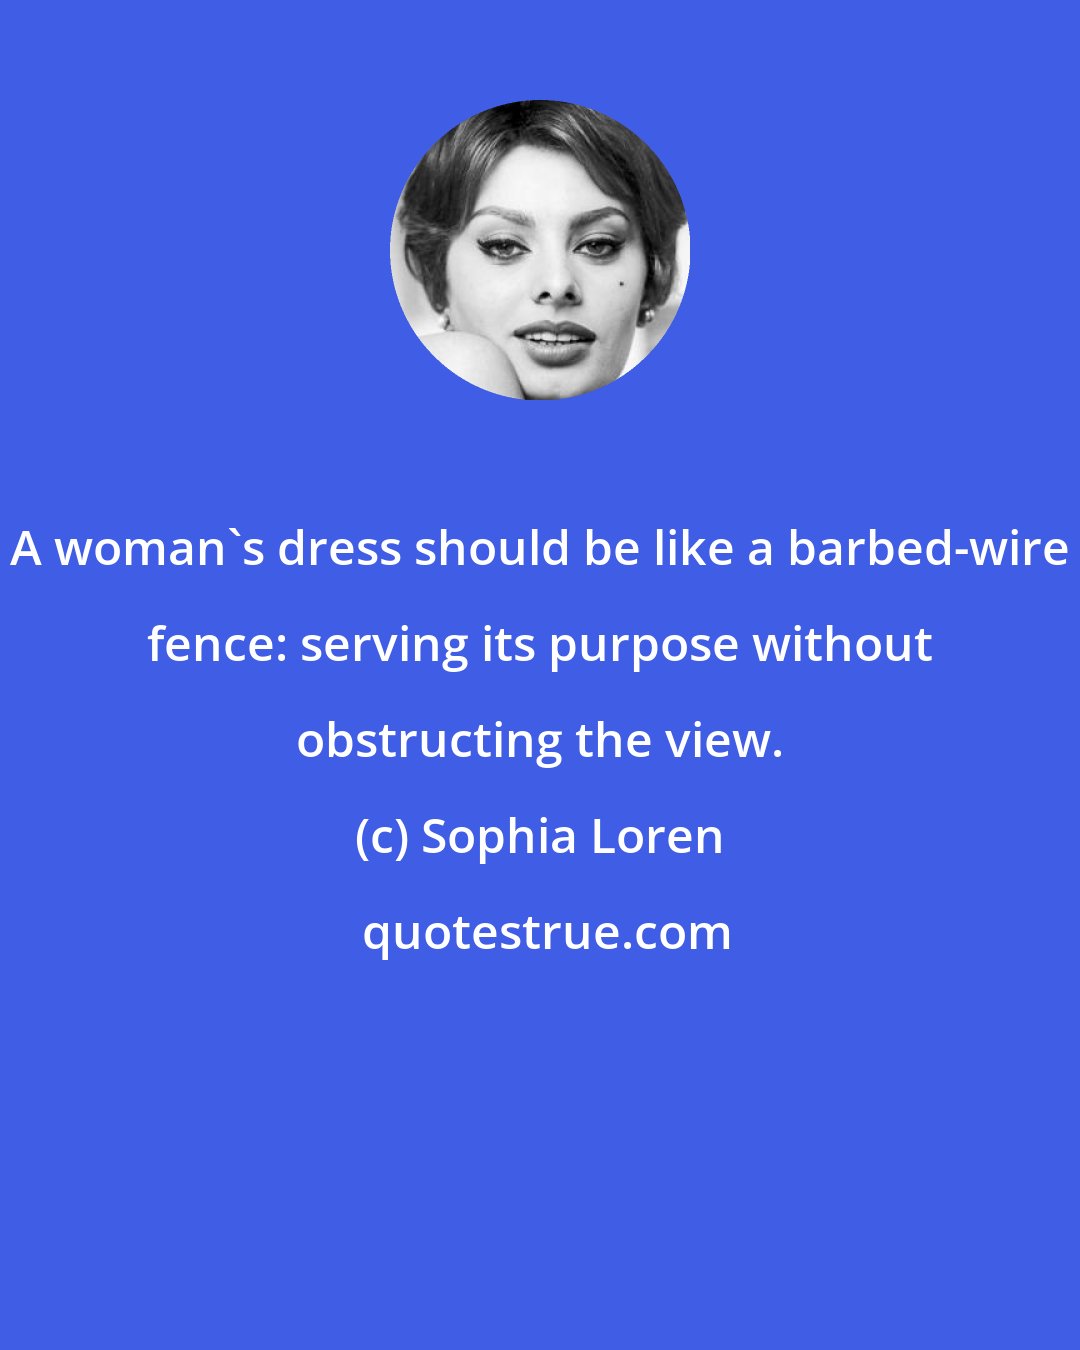 Sophia Loren: A woman's dress should be like a barbed-wire fence: serving its purpose without obstructing the view.